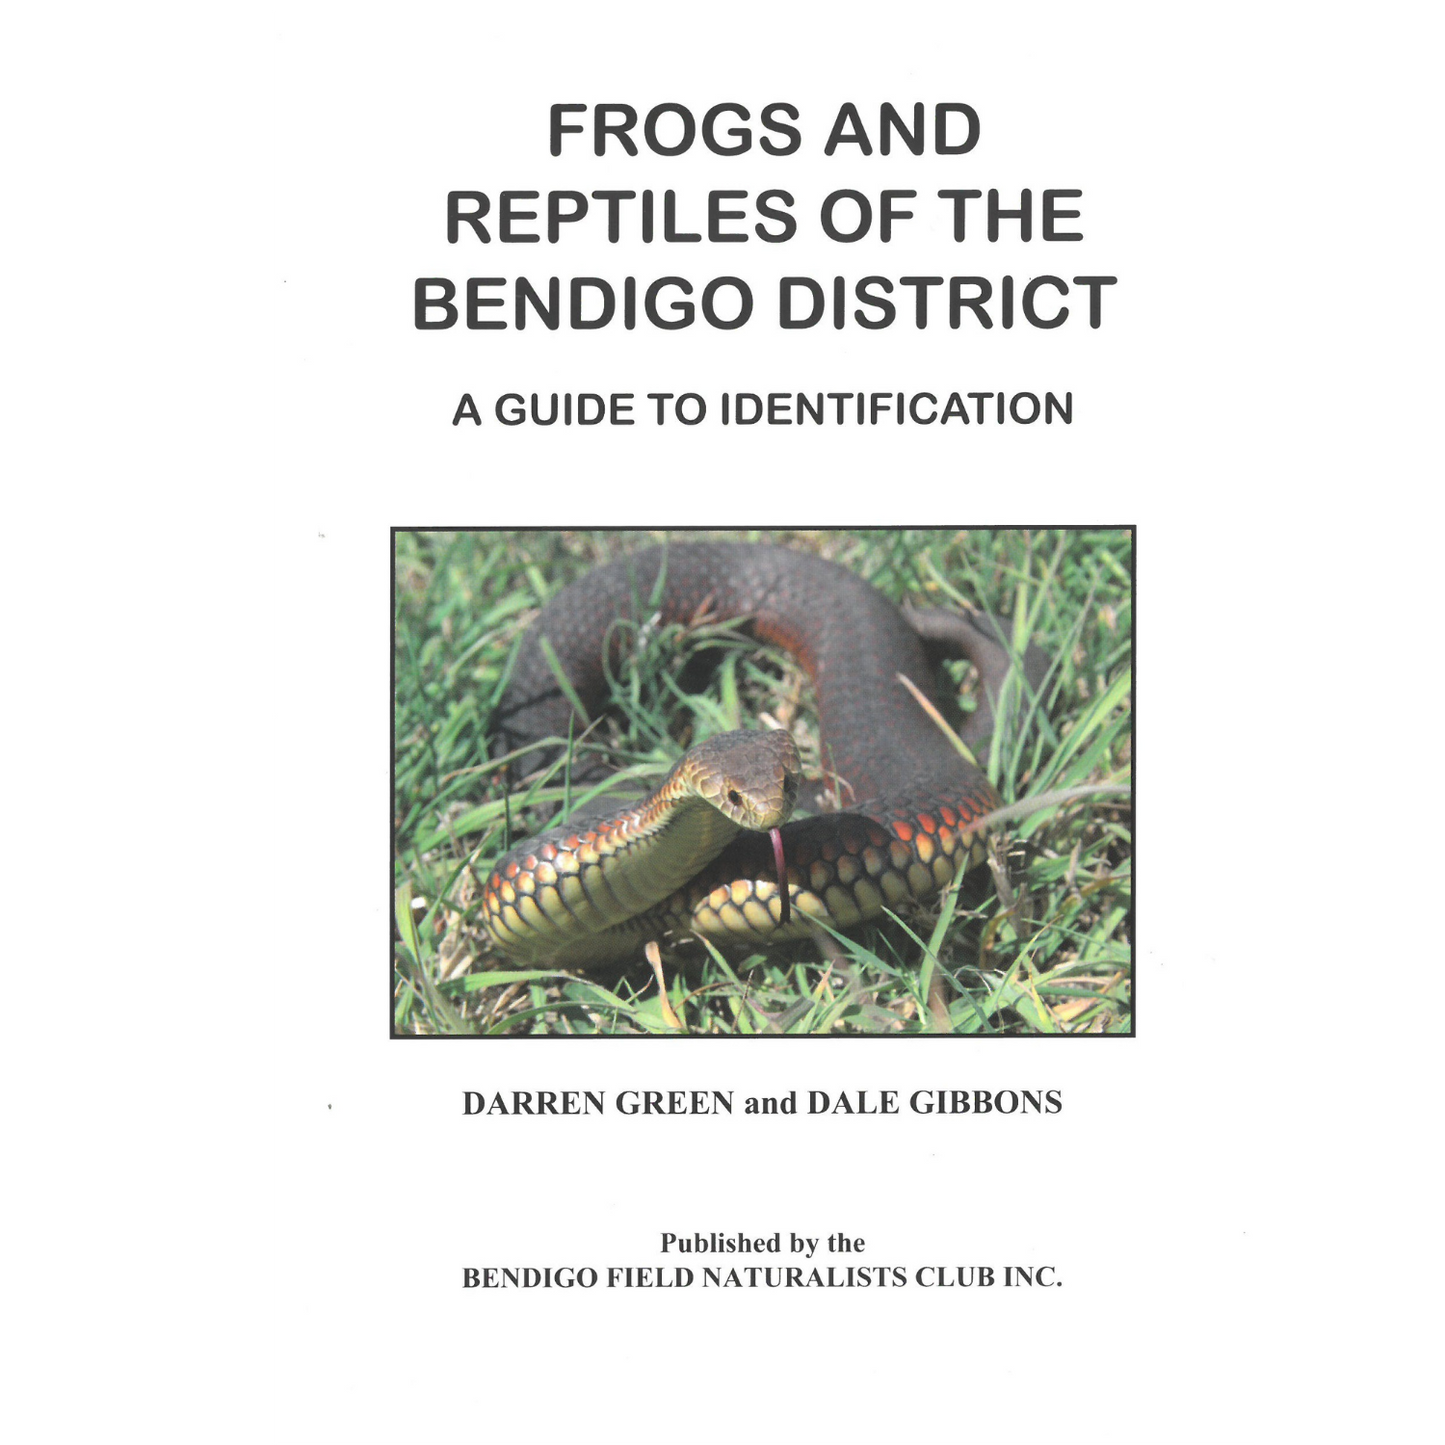 Field Naturalists -Frogs & Reptiles of the Bendigo District